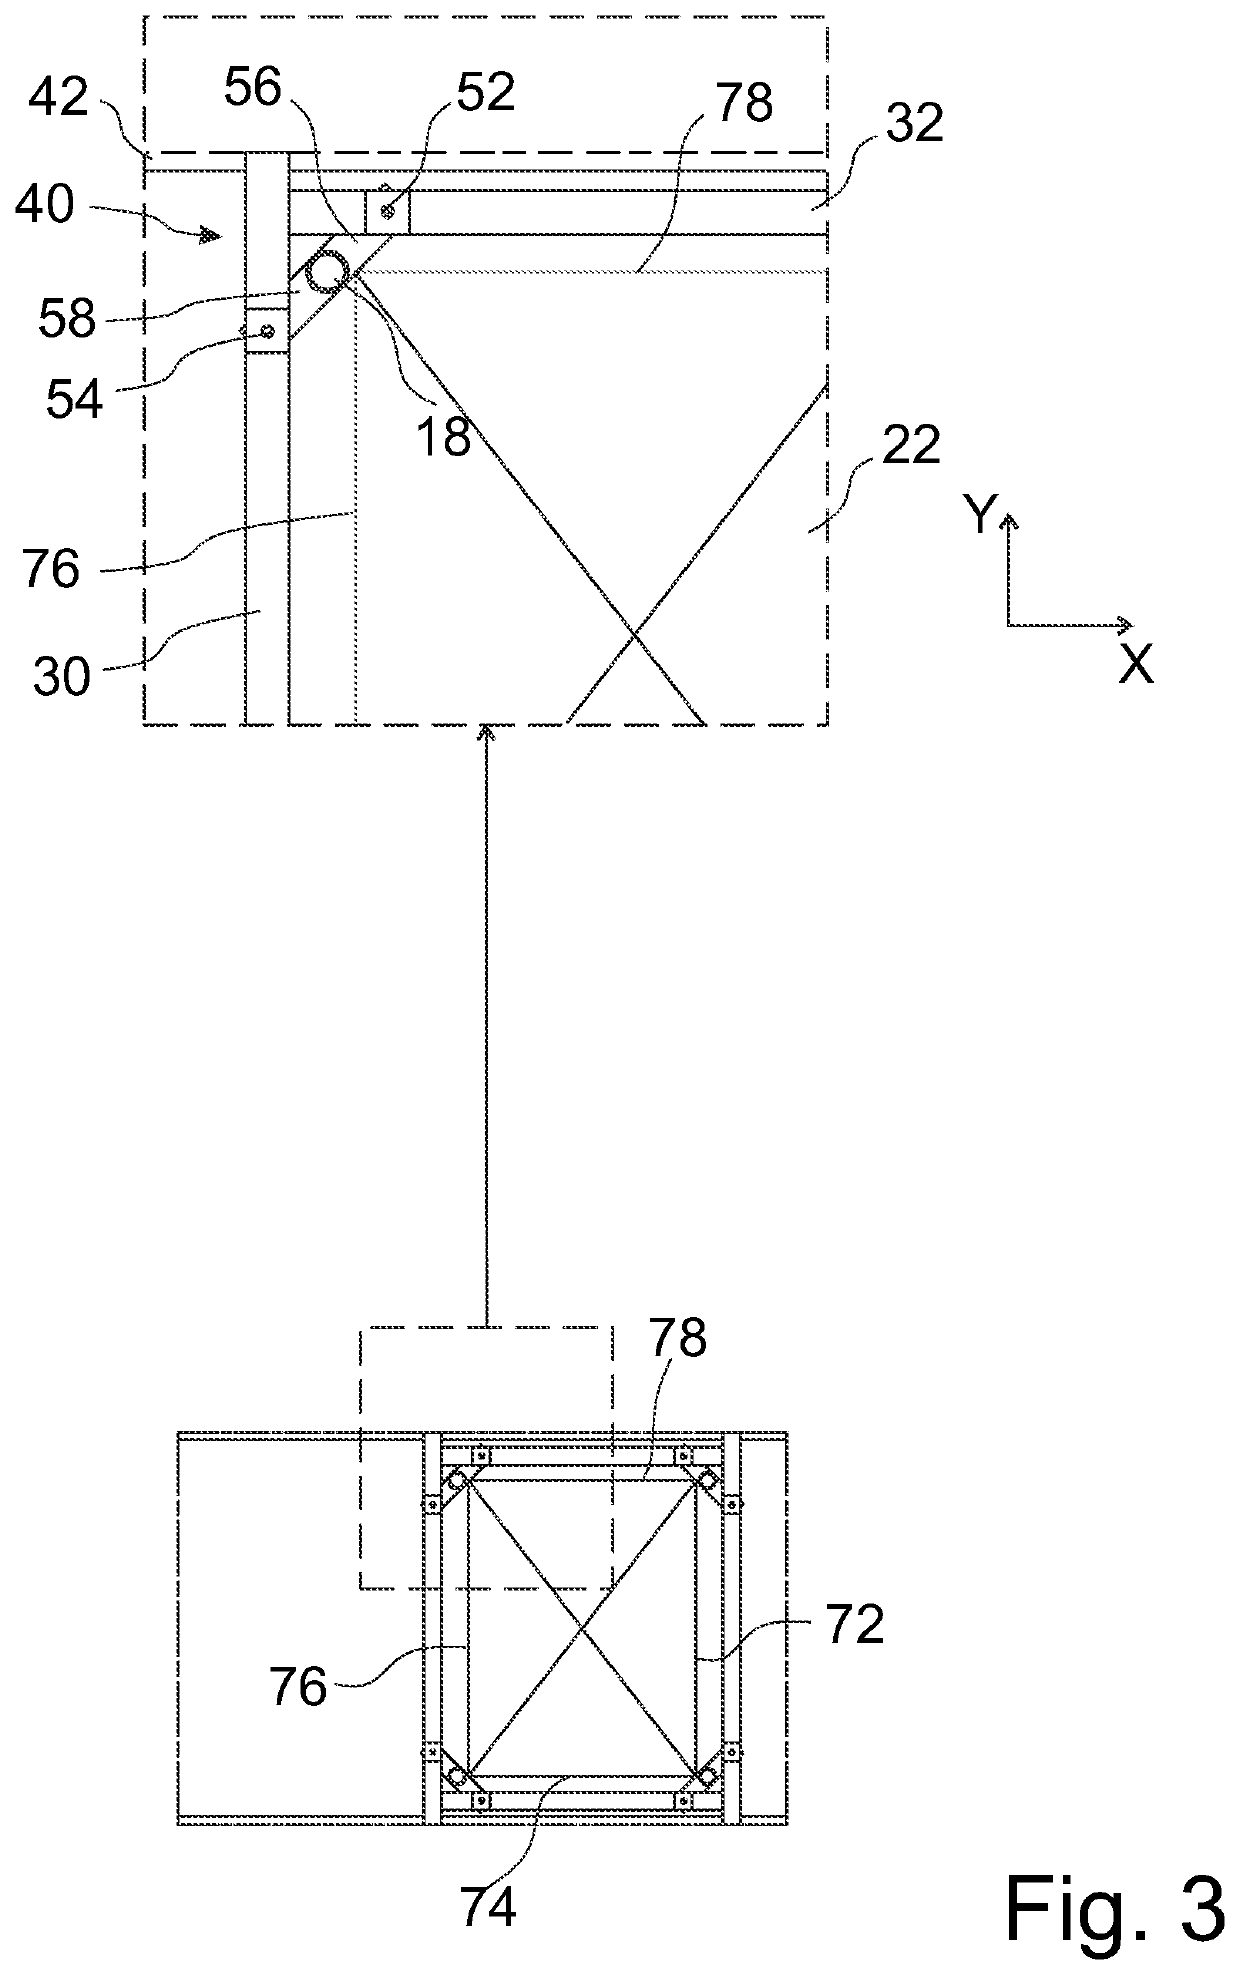 Support assembly for a boiler